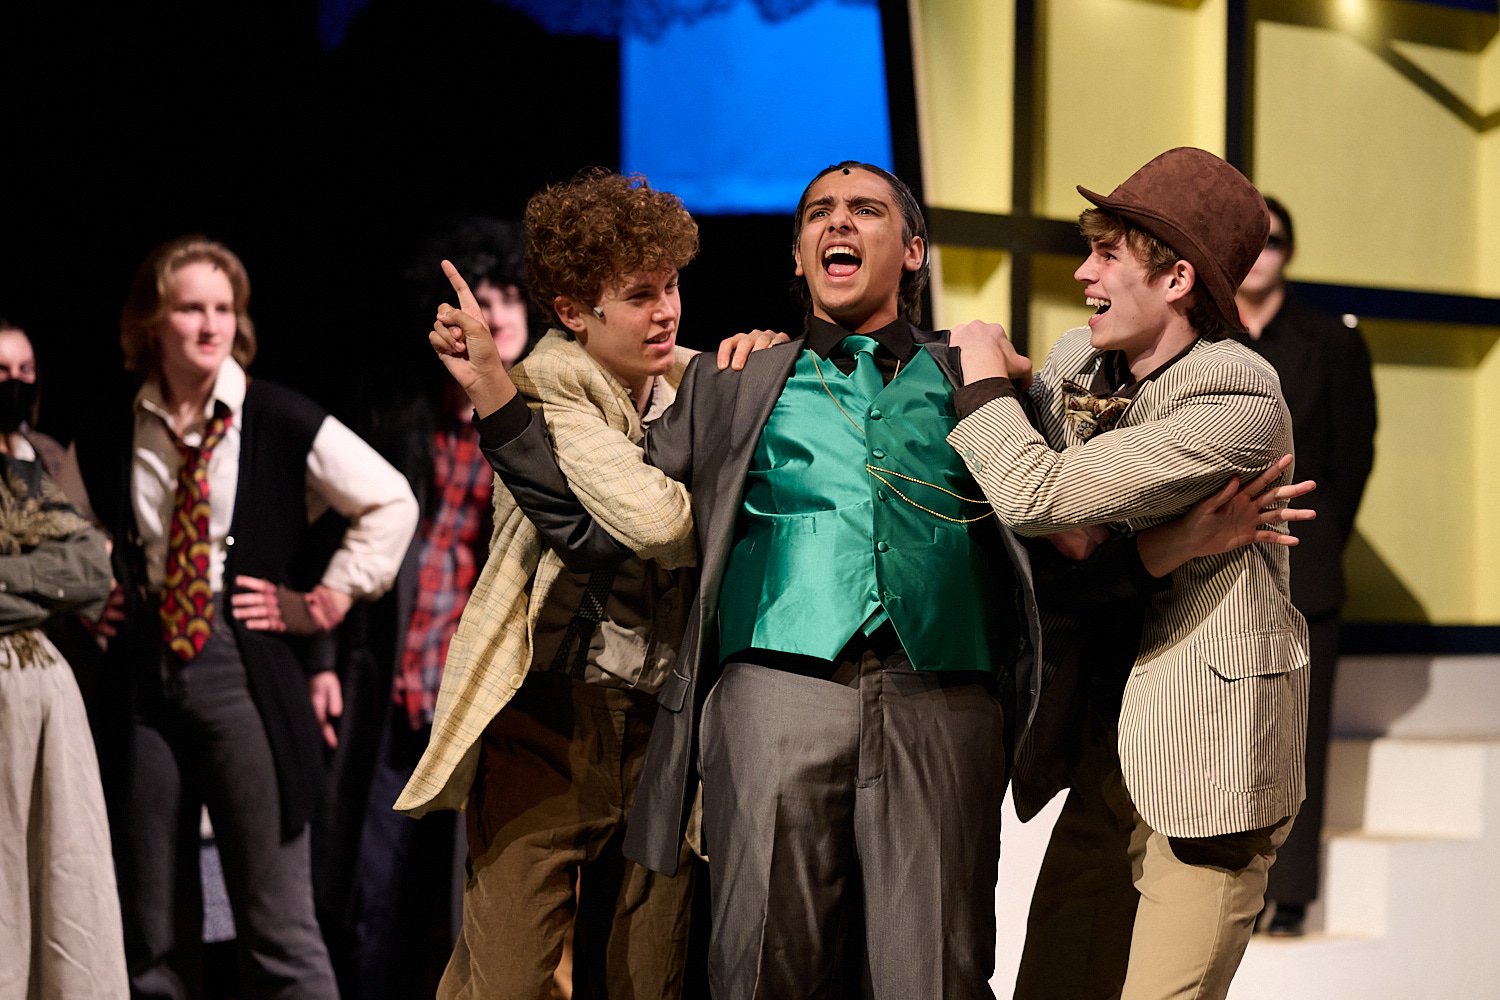  SEWICKLEY, PA, USA - MARCH 2ND 2022: High School students of Sewickley Academy are performing in an annual musical show “Urinetown” running on March 3rd-5th 2022. Max Peluso 